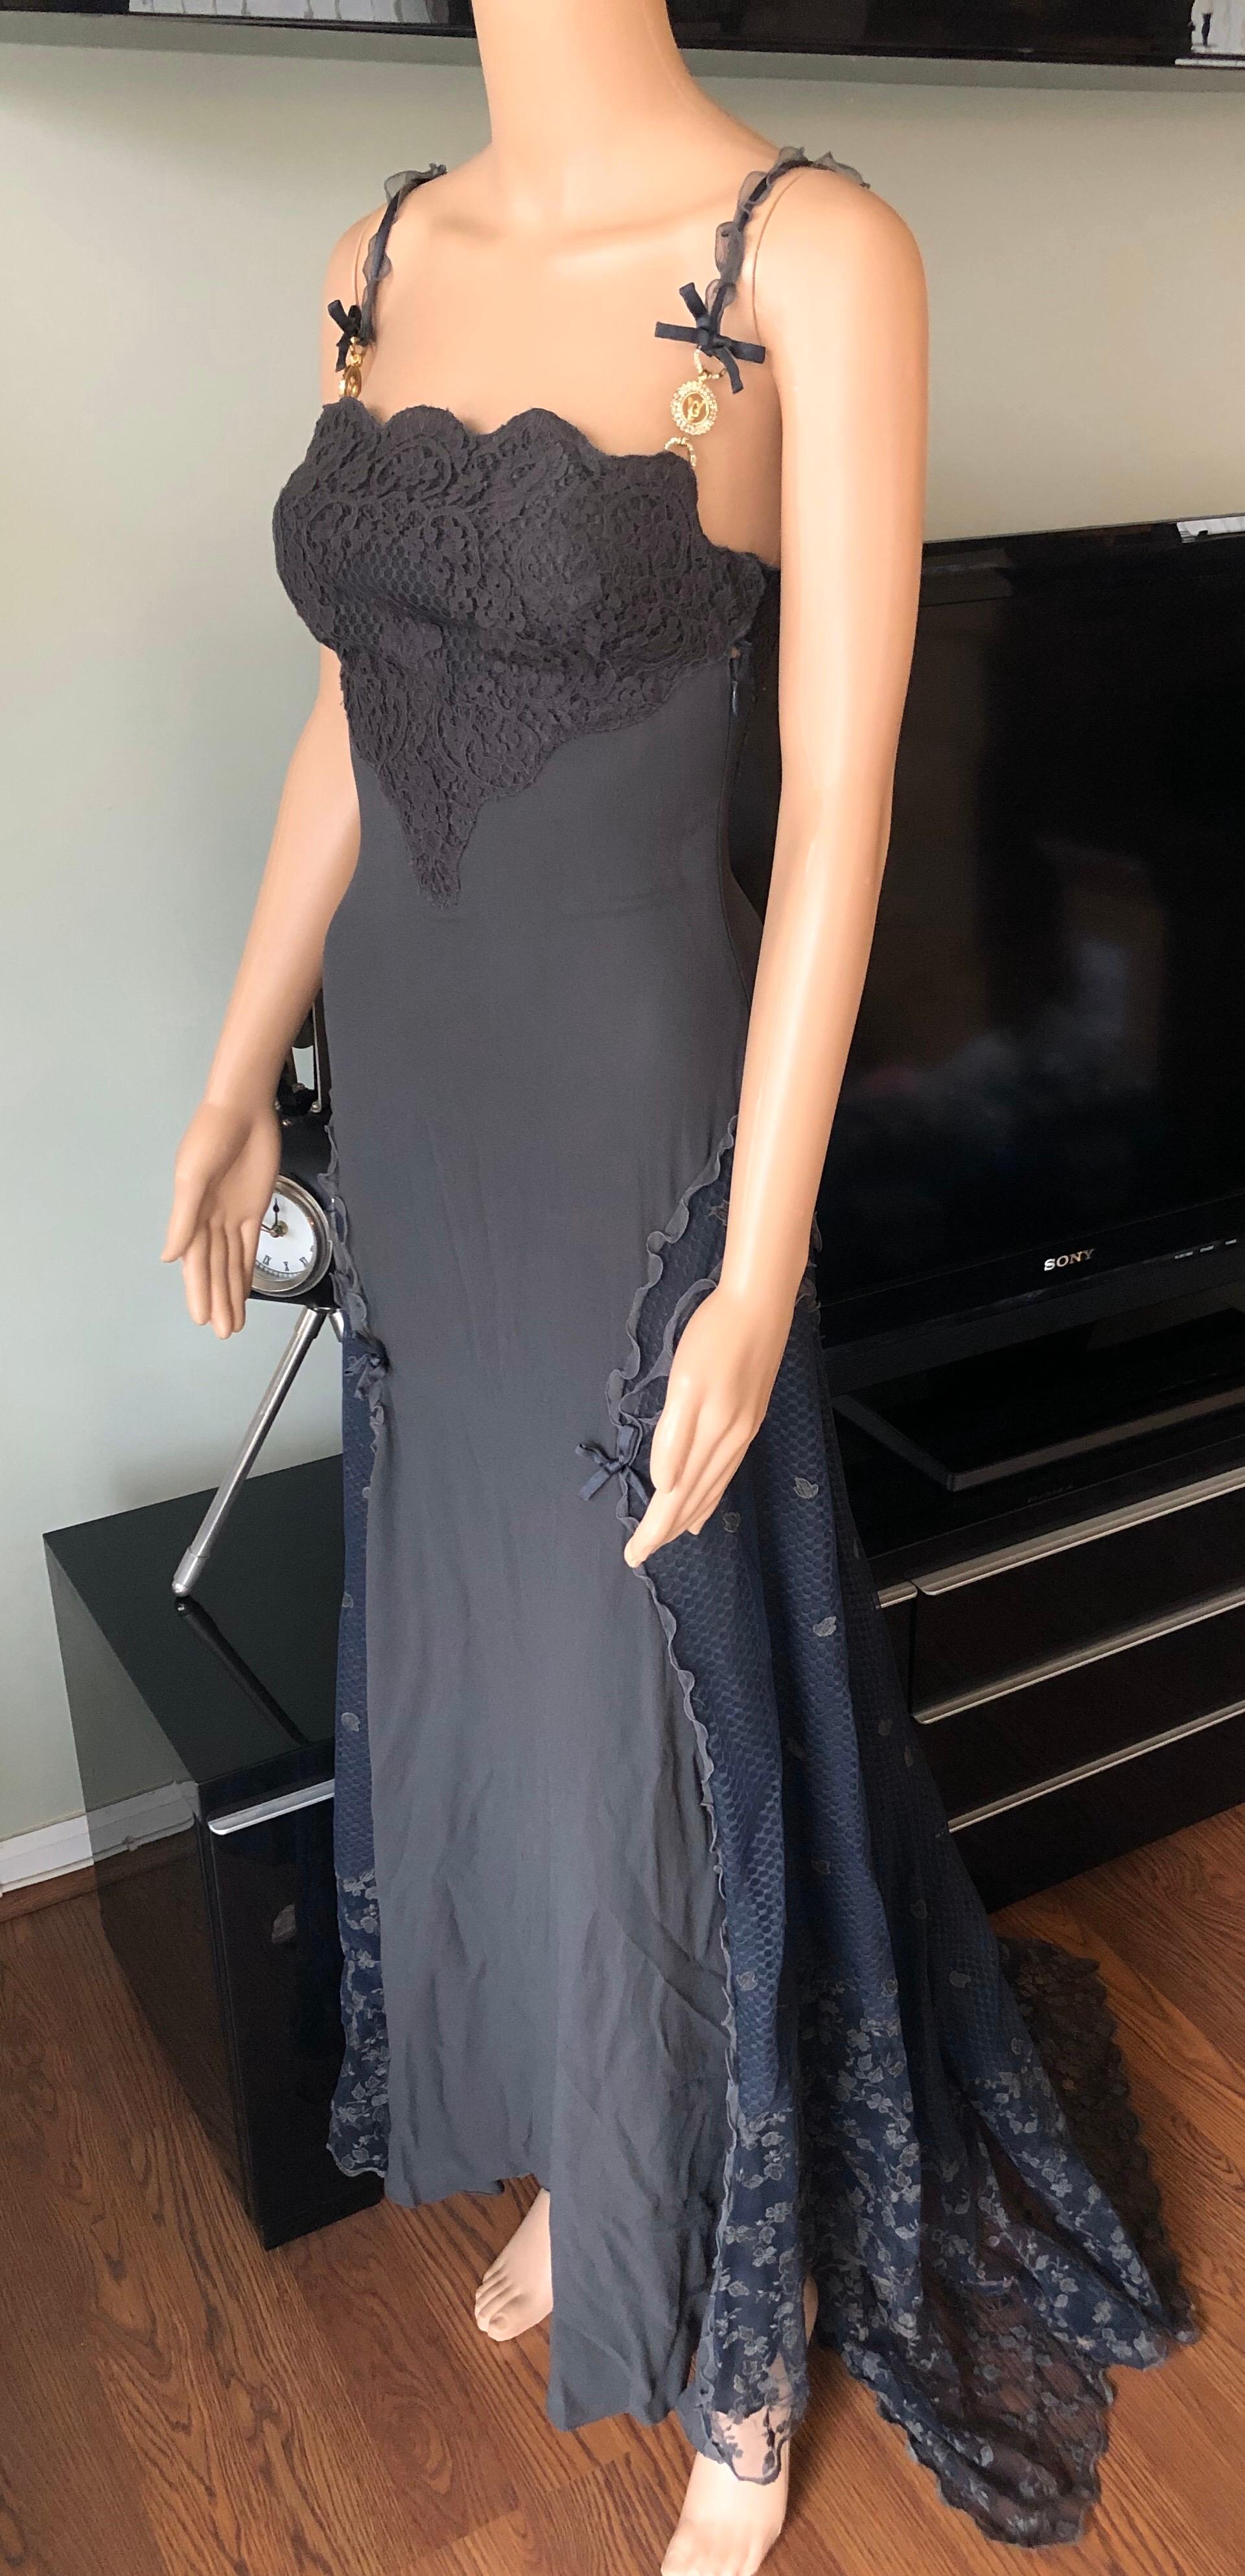 Gianni Versace S/S 1997 Runway Sheer Lace Panels Grey Evening Dress Gown In Good Condition For Sale In Naples, FL